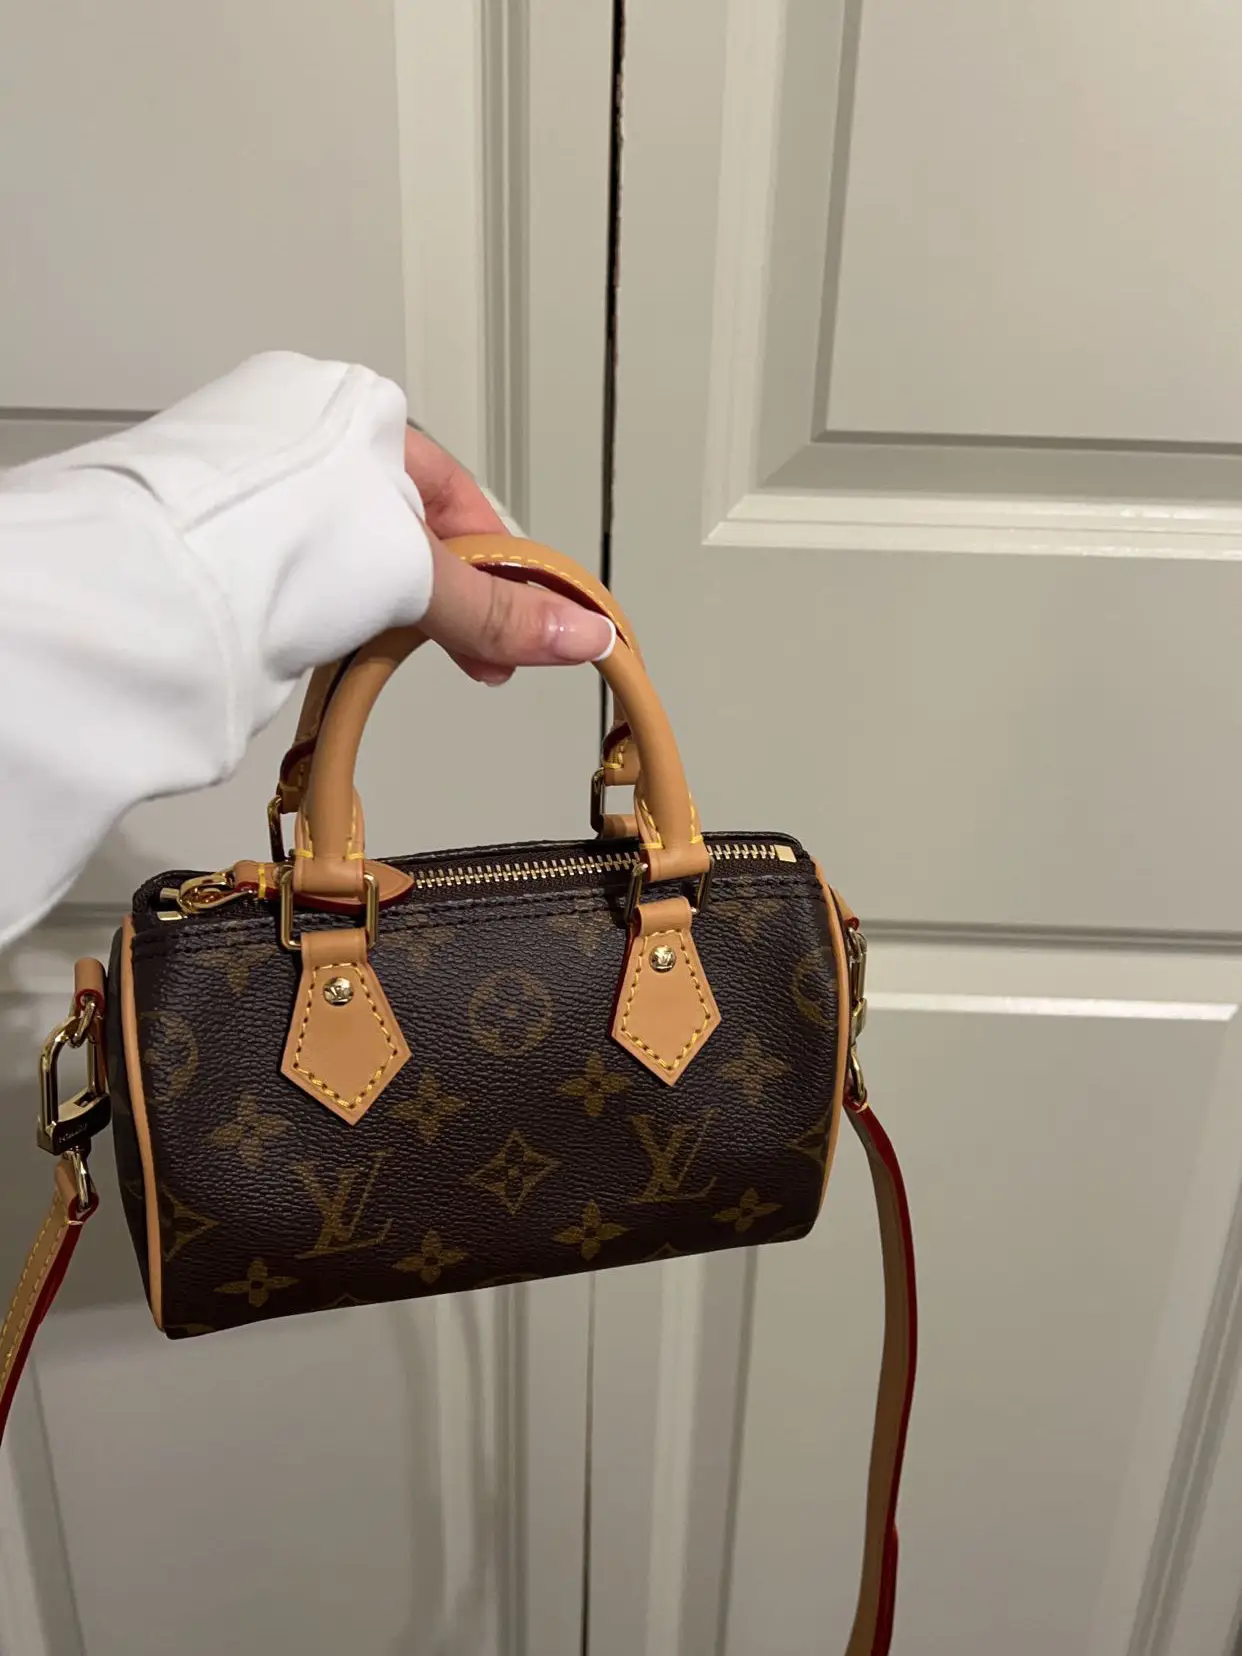 WHY I'M NOT BUYING THE NEW LOUIS VUITTON NANO SPEEDY & WHY THE ORIGINAL NANO  SPEEDY IS BETTER 